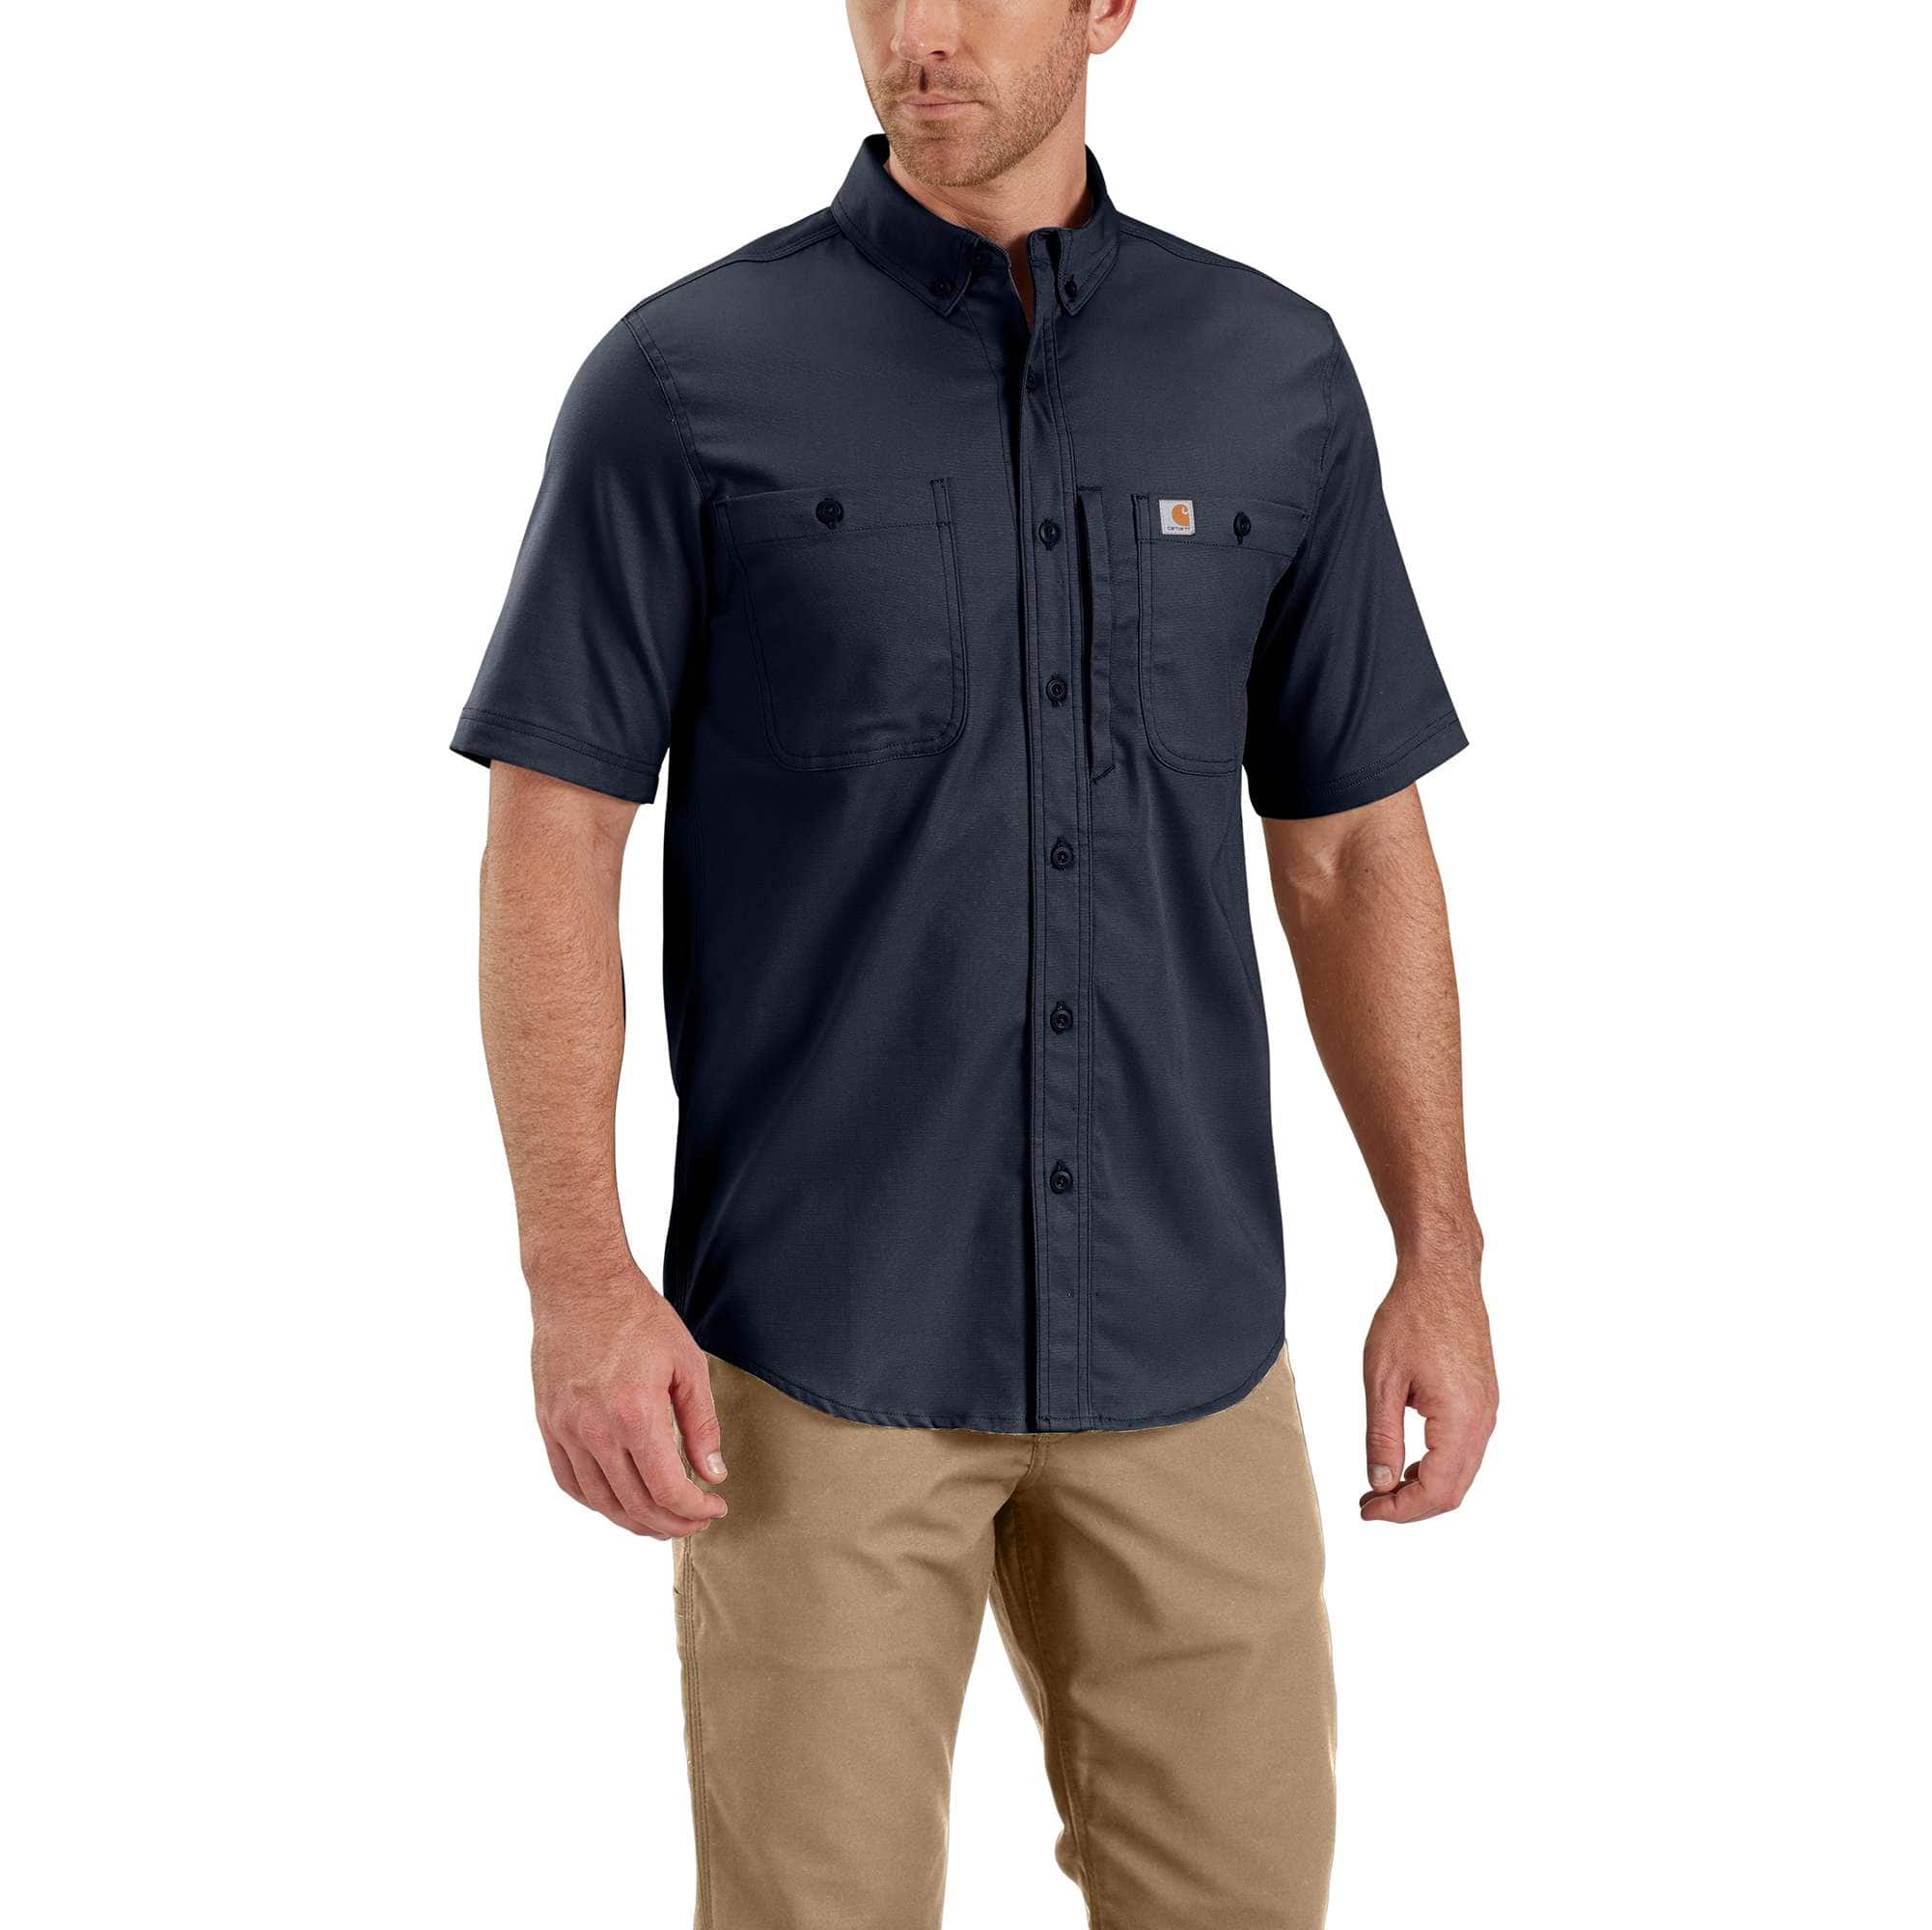 Rugged Professional™ Series Relaxed Fit Canvas Short Sleeve Work Shirt